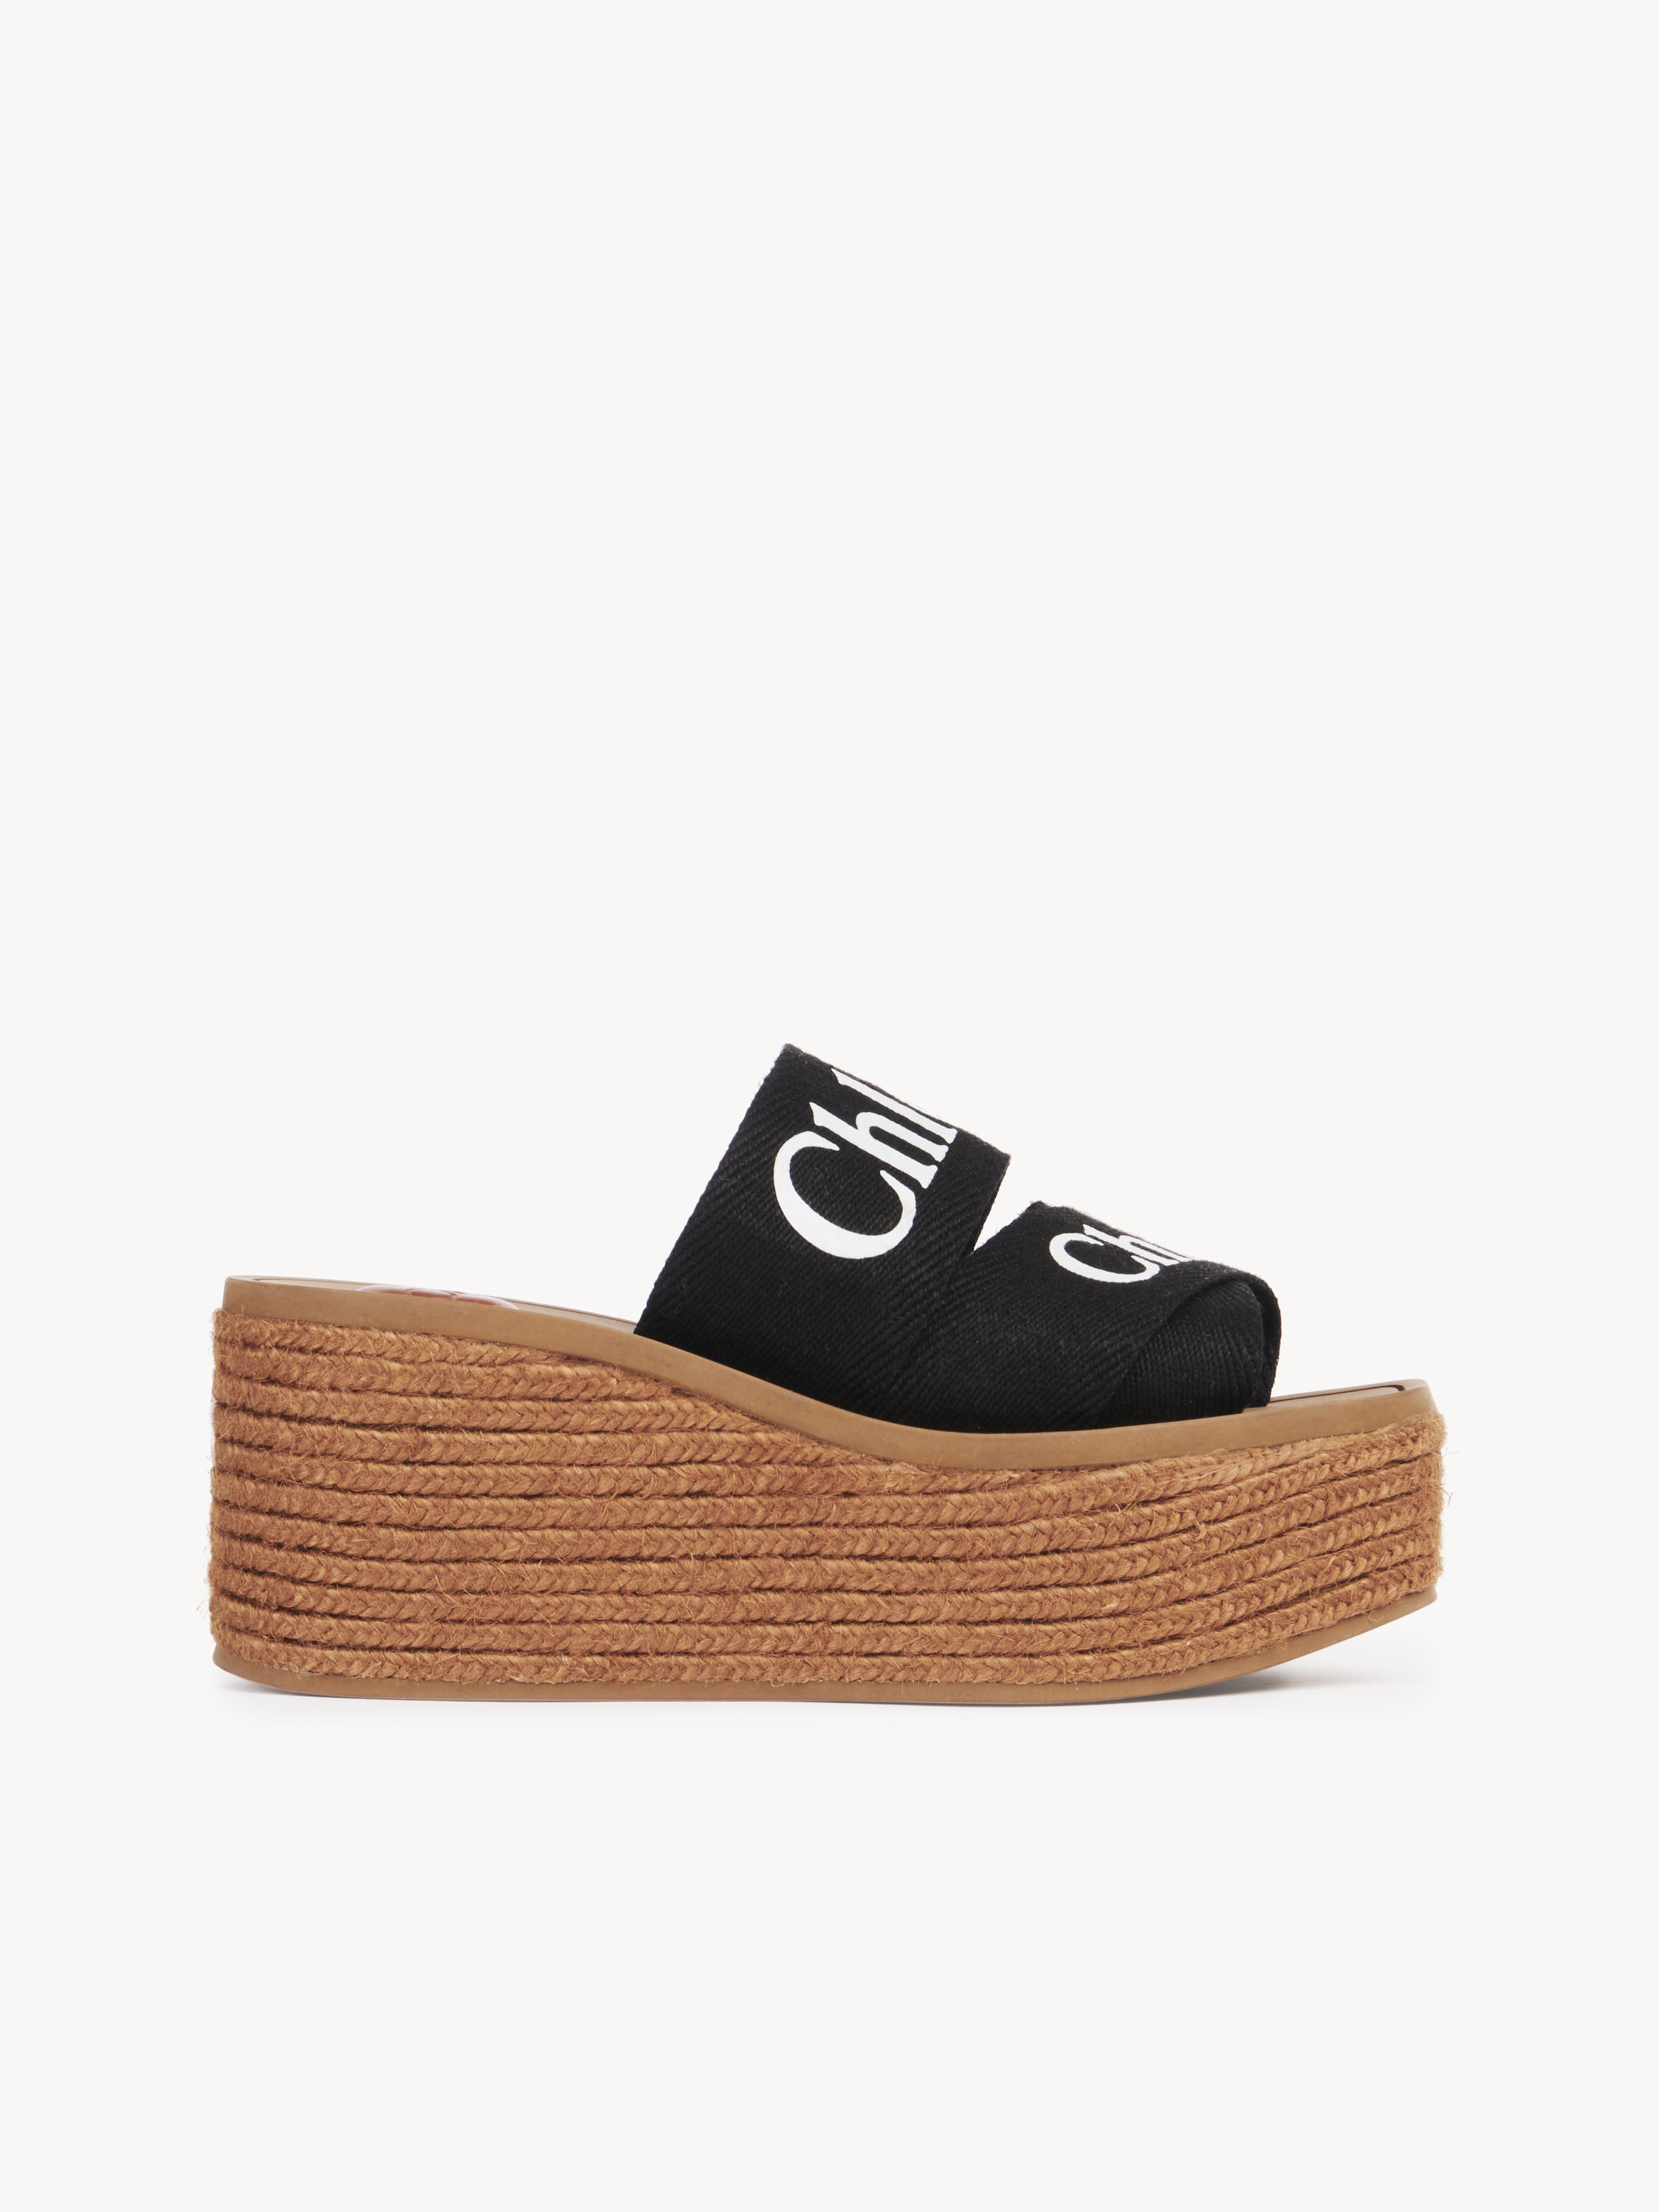 Chloé Woody Wedge Espadrille Black Size 2 90% Linen, 10% Polyester, Quercus Suber, Farmed, Coo Spain In Noir